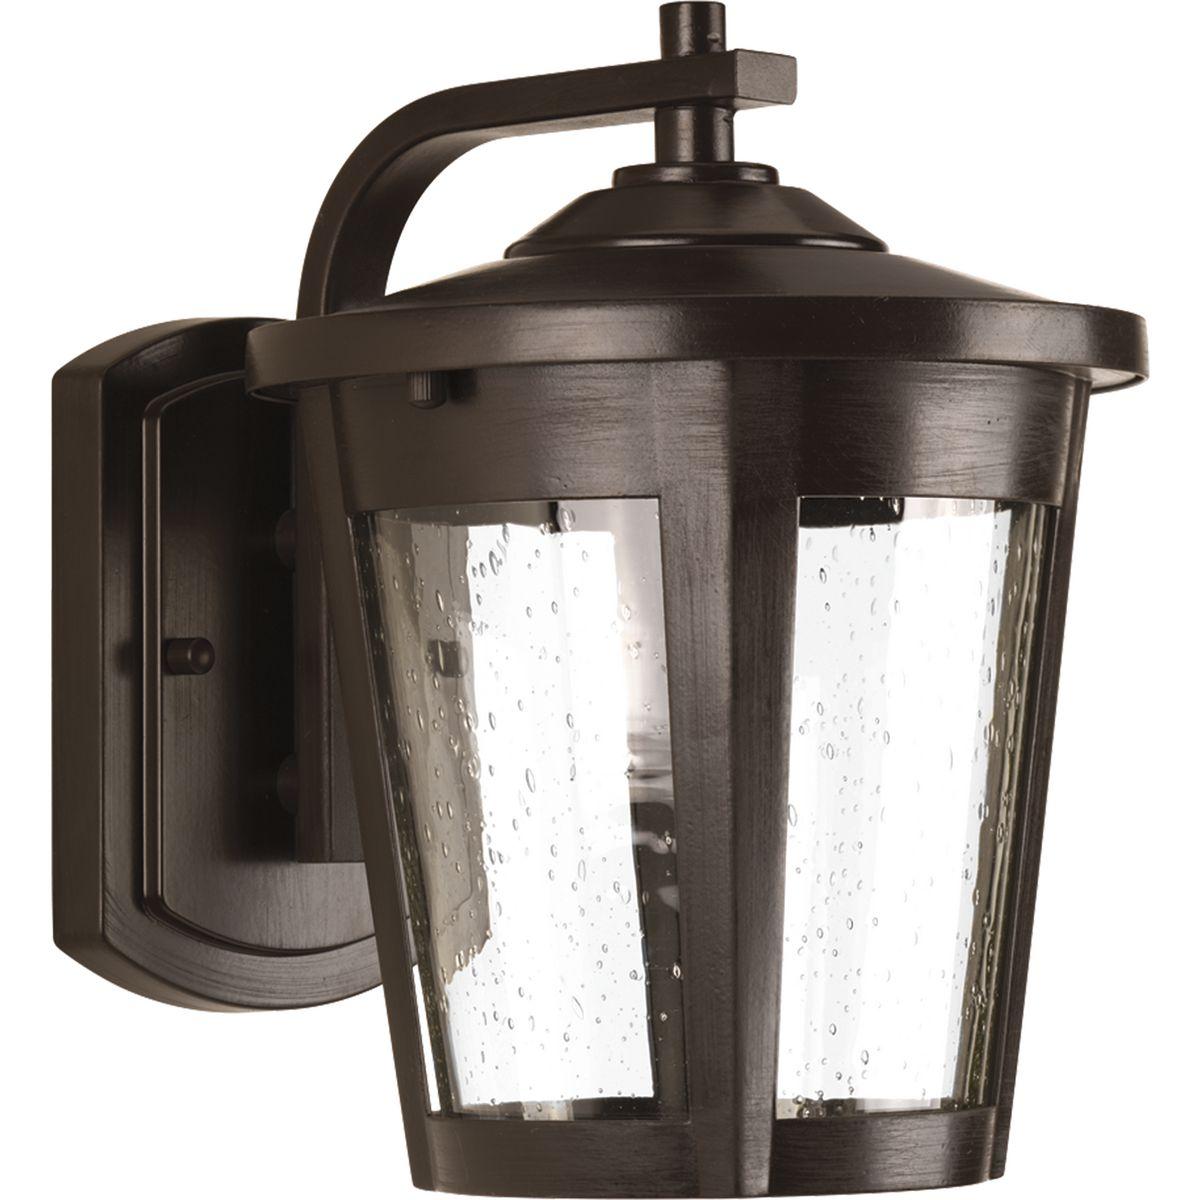 Hubbell P6078-2030K9 The East Haven LED Collection offers modern styling to complement a wide variety of home styles. The one-light medium LED outdoor wall lantern has an Antique Bronze frame that cradles a seeded glass shade. 120V AC replaceable LED module, 623 lumens (sourc